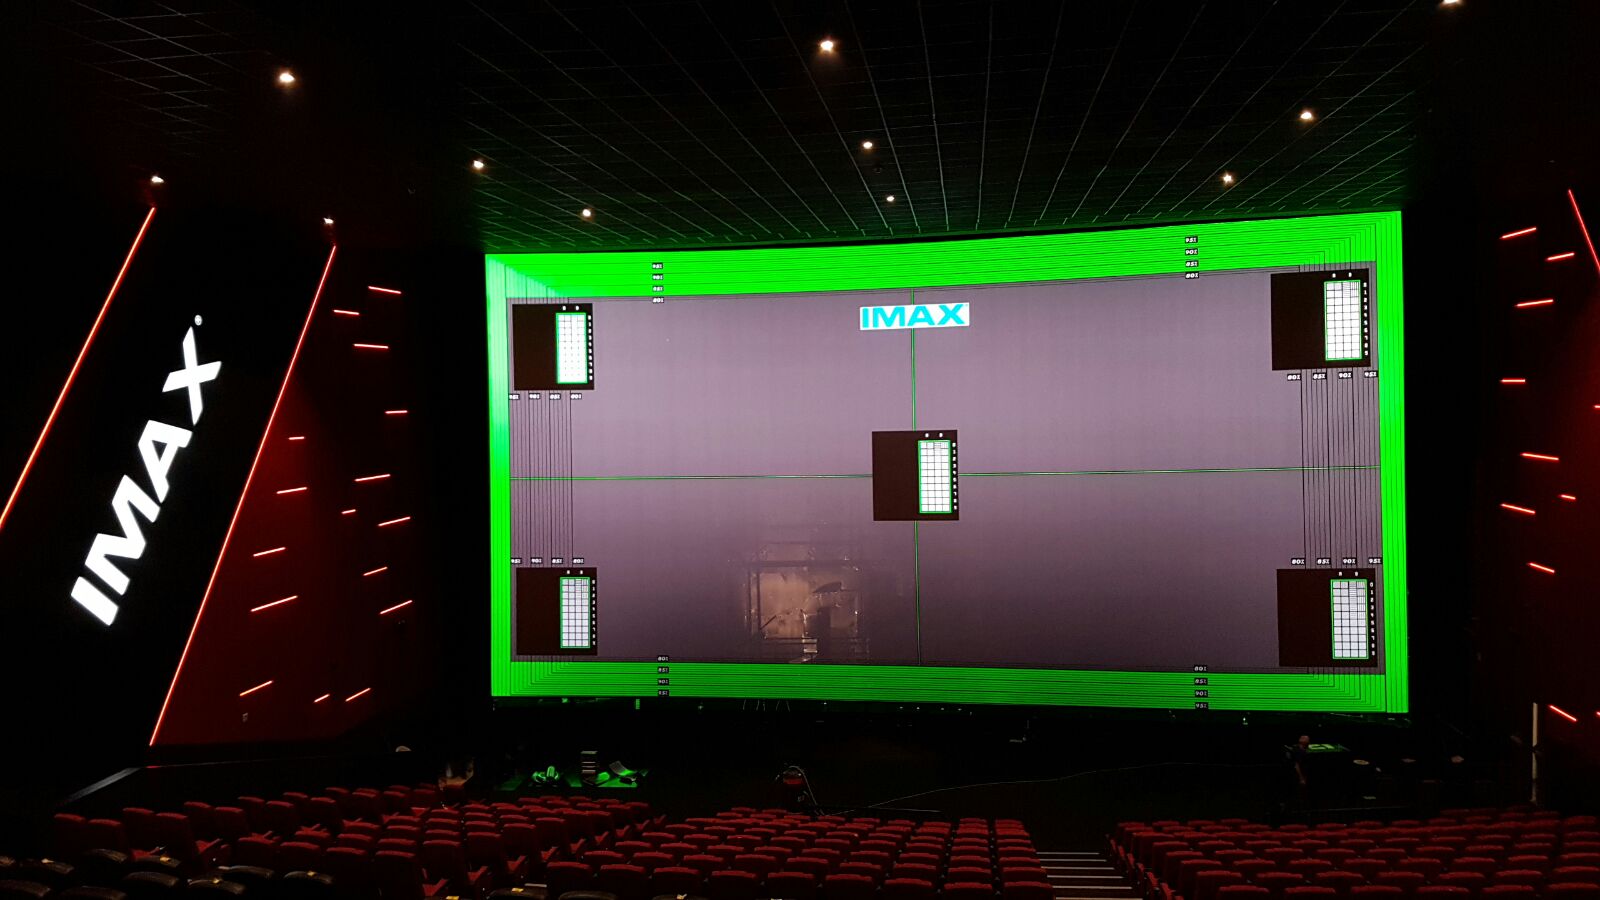 IMAX in VOX at Beirut City Center